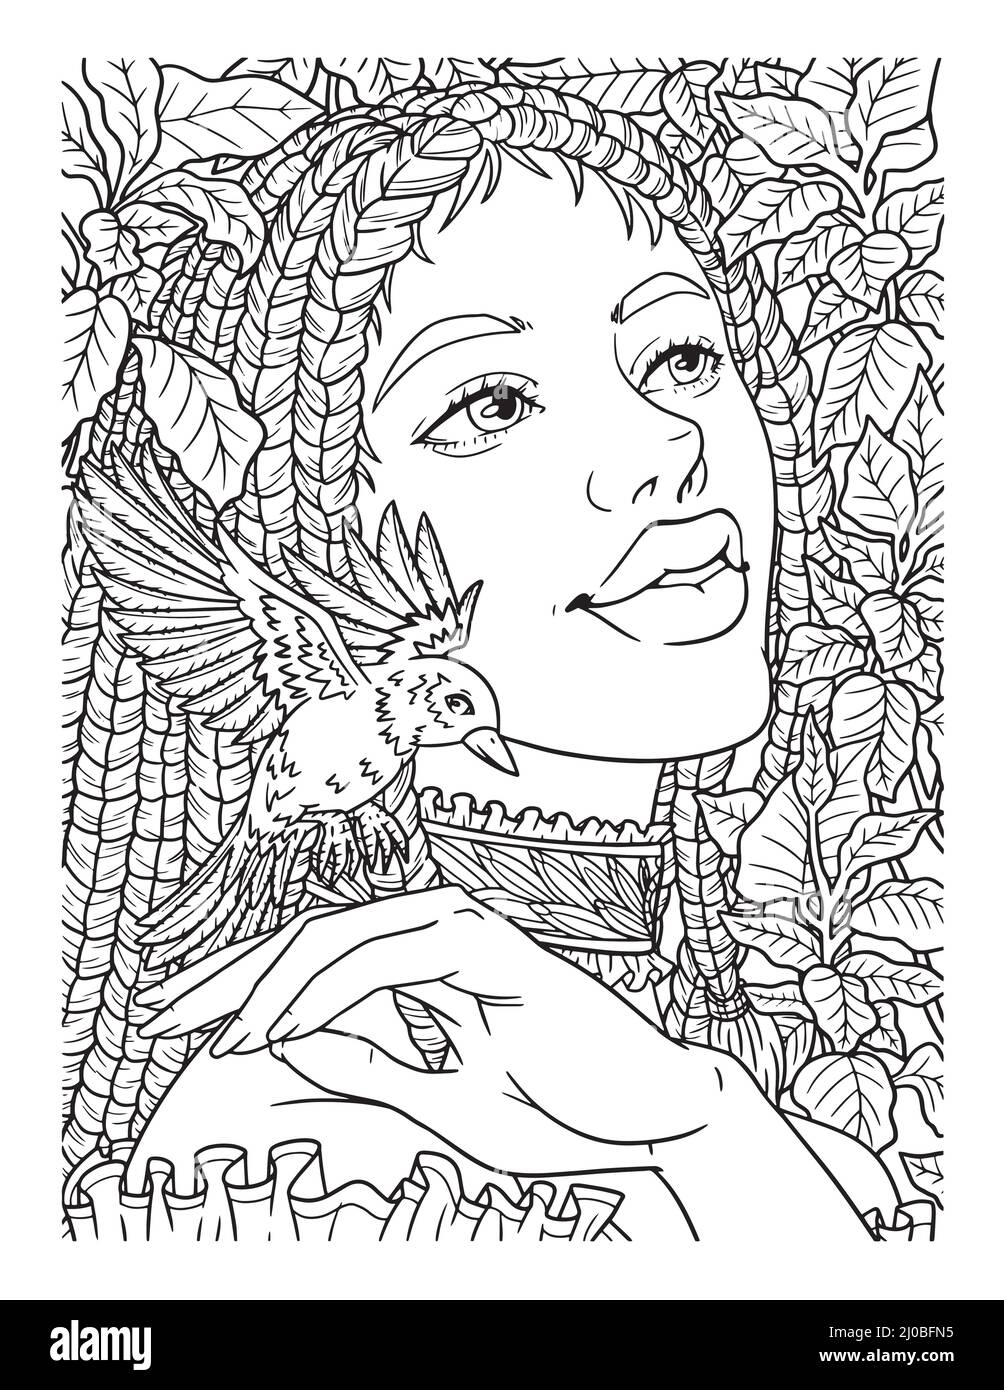 Afro American Girl With Bird Adult Coloring Page  Stock Vector